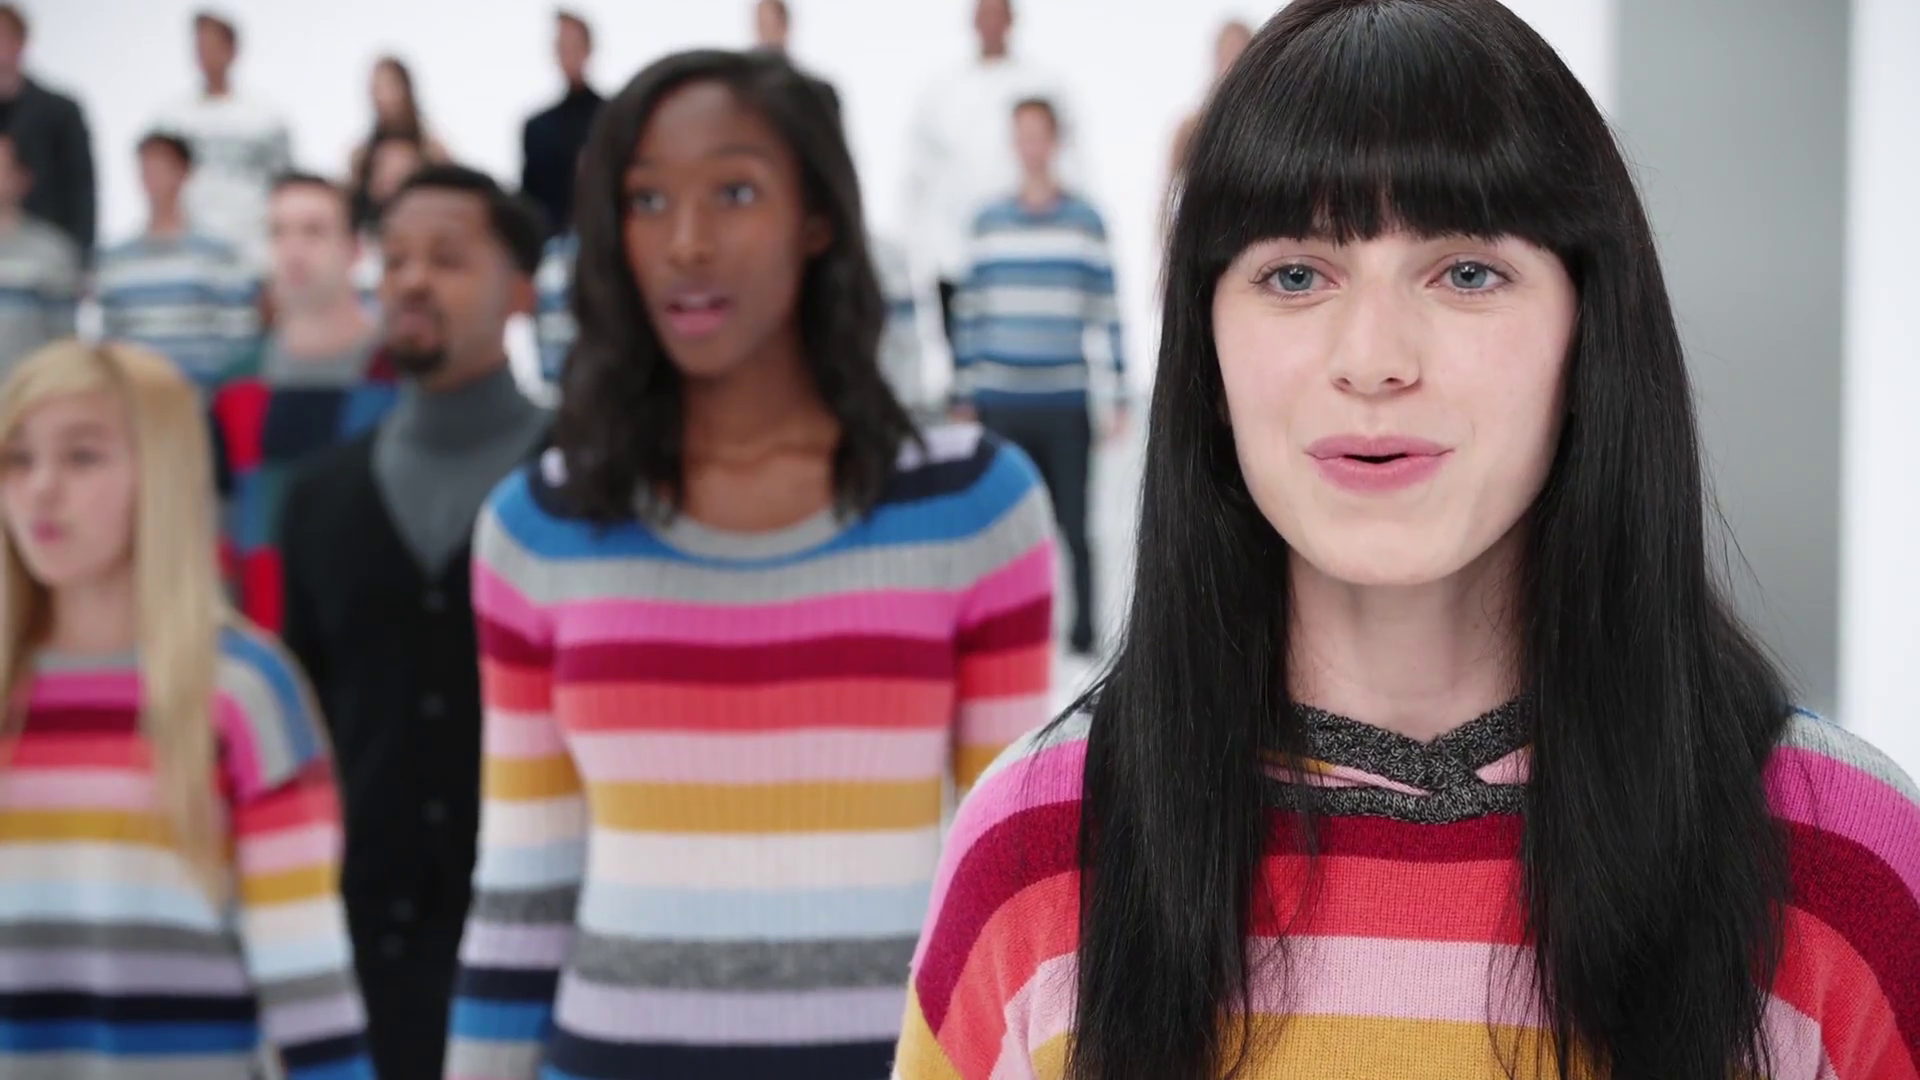 Jessica Lynn Parsons singing in Gap commercial with Janelle Monae